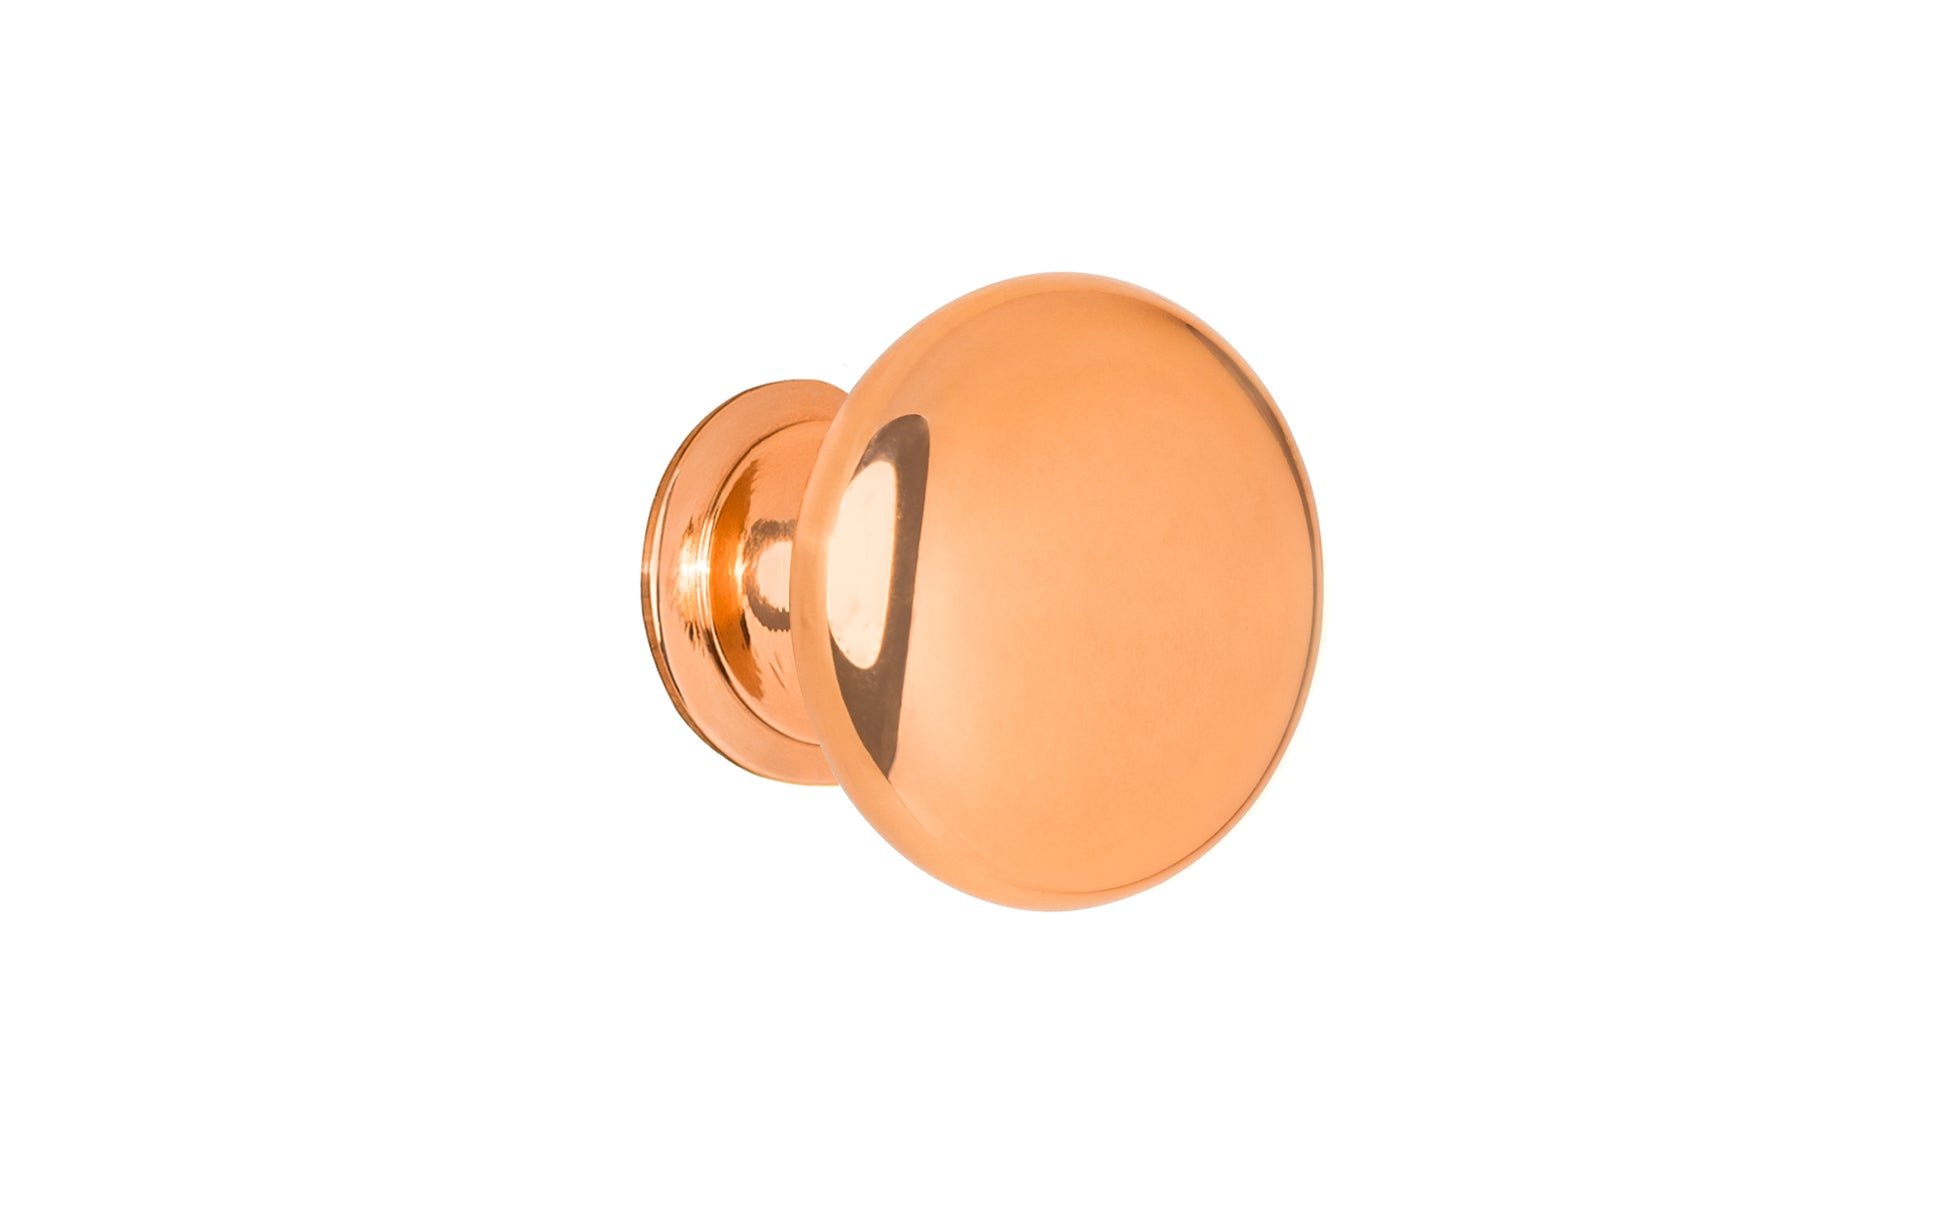 Vintage-style Hardware · Traditional & Classic Brass Knob with a Polished Copper Finish. 1" diameter size knob. Made of high quality brass, this stylish round cabinet knob has a smooth look & feel on a pedestal shaped base. Works great in kitchens, bathrooms, on furniture, cabinets, drawers. Authentic reproduction hardware.